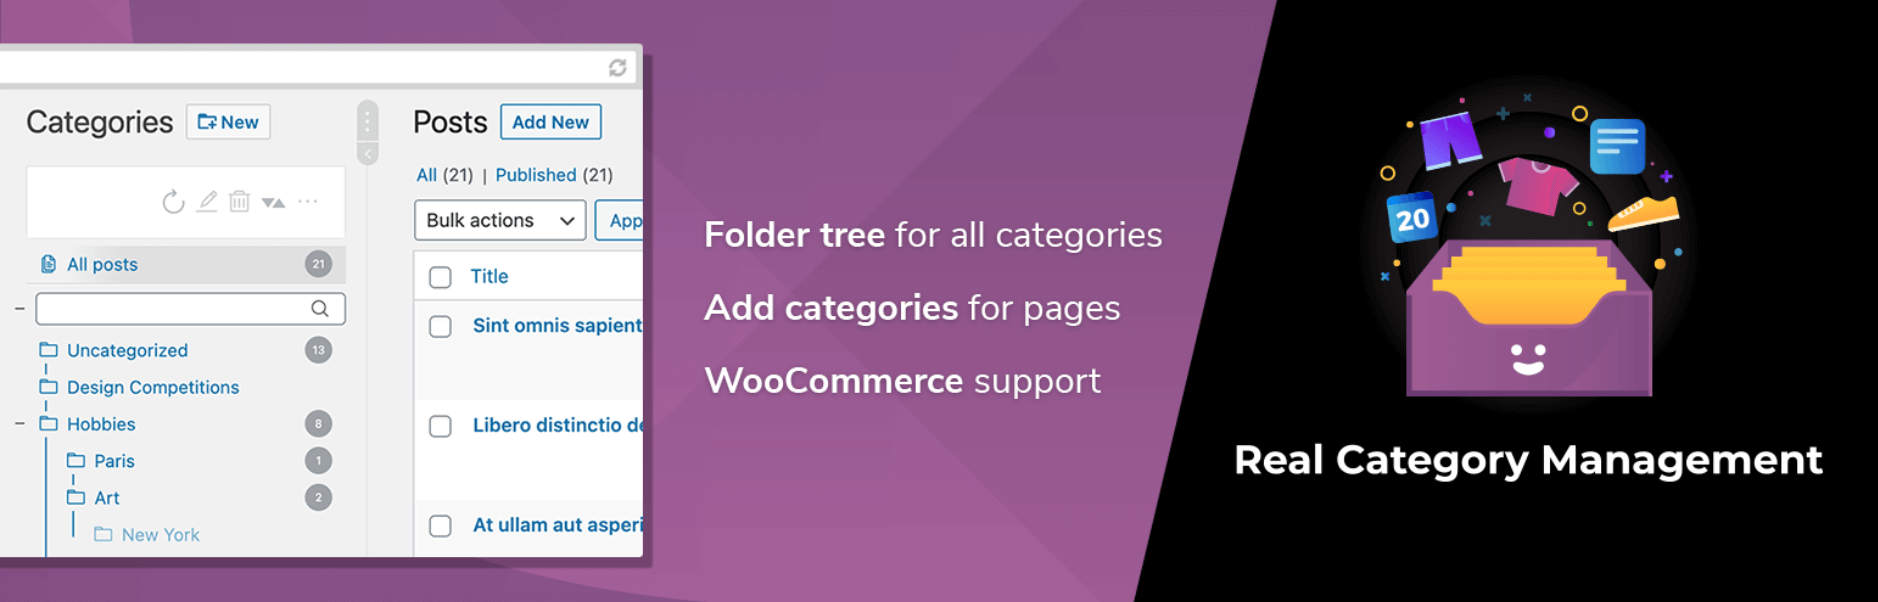 The WordPress Real Category Management: Content Management in Category Folders plugin.